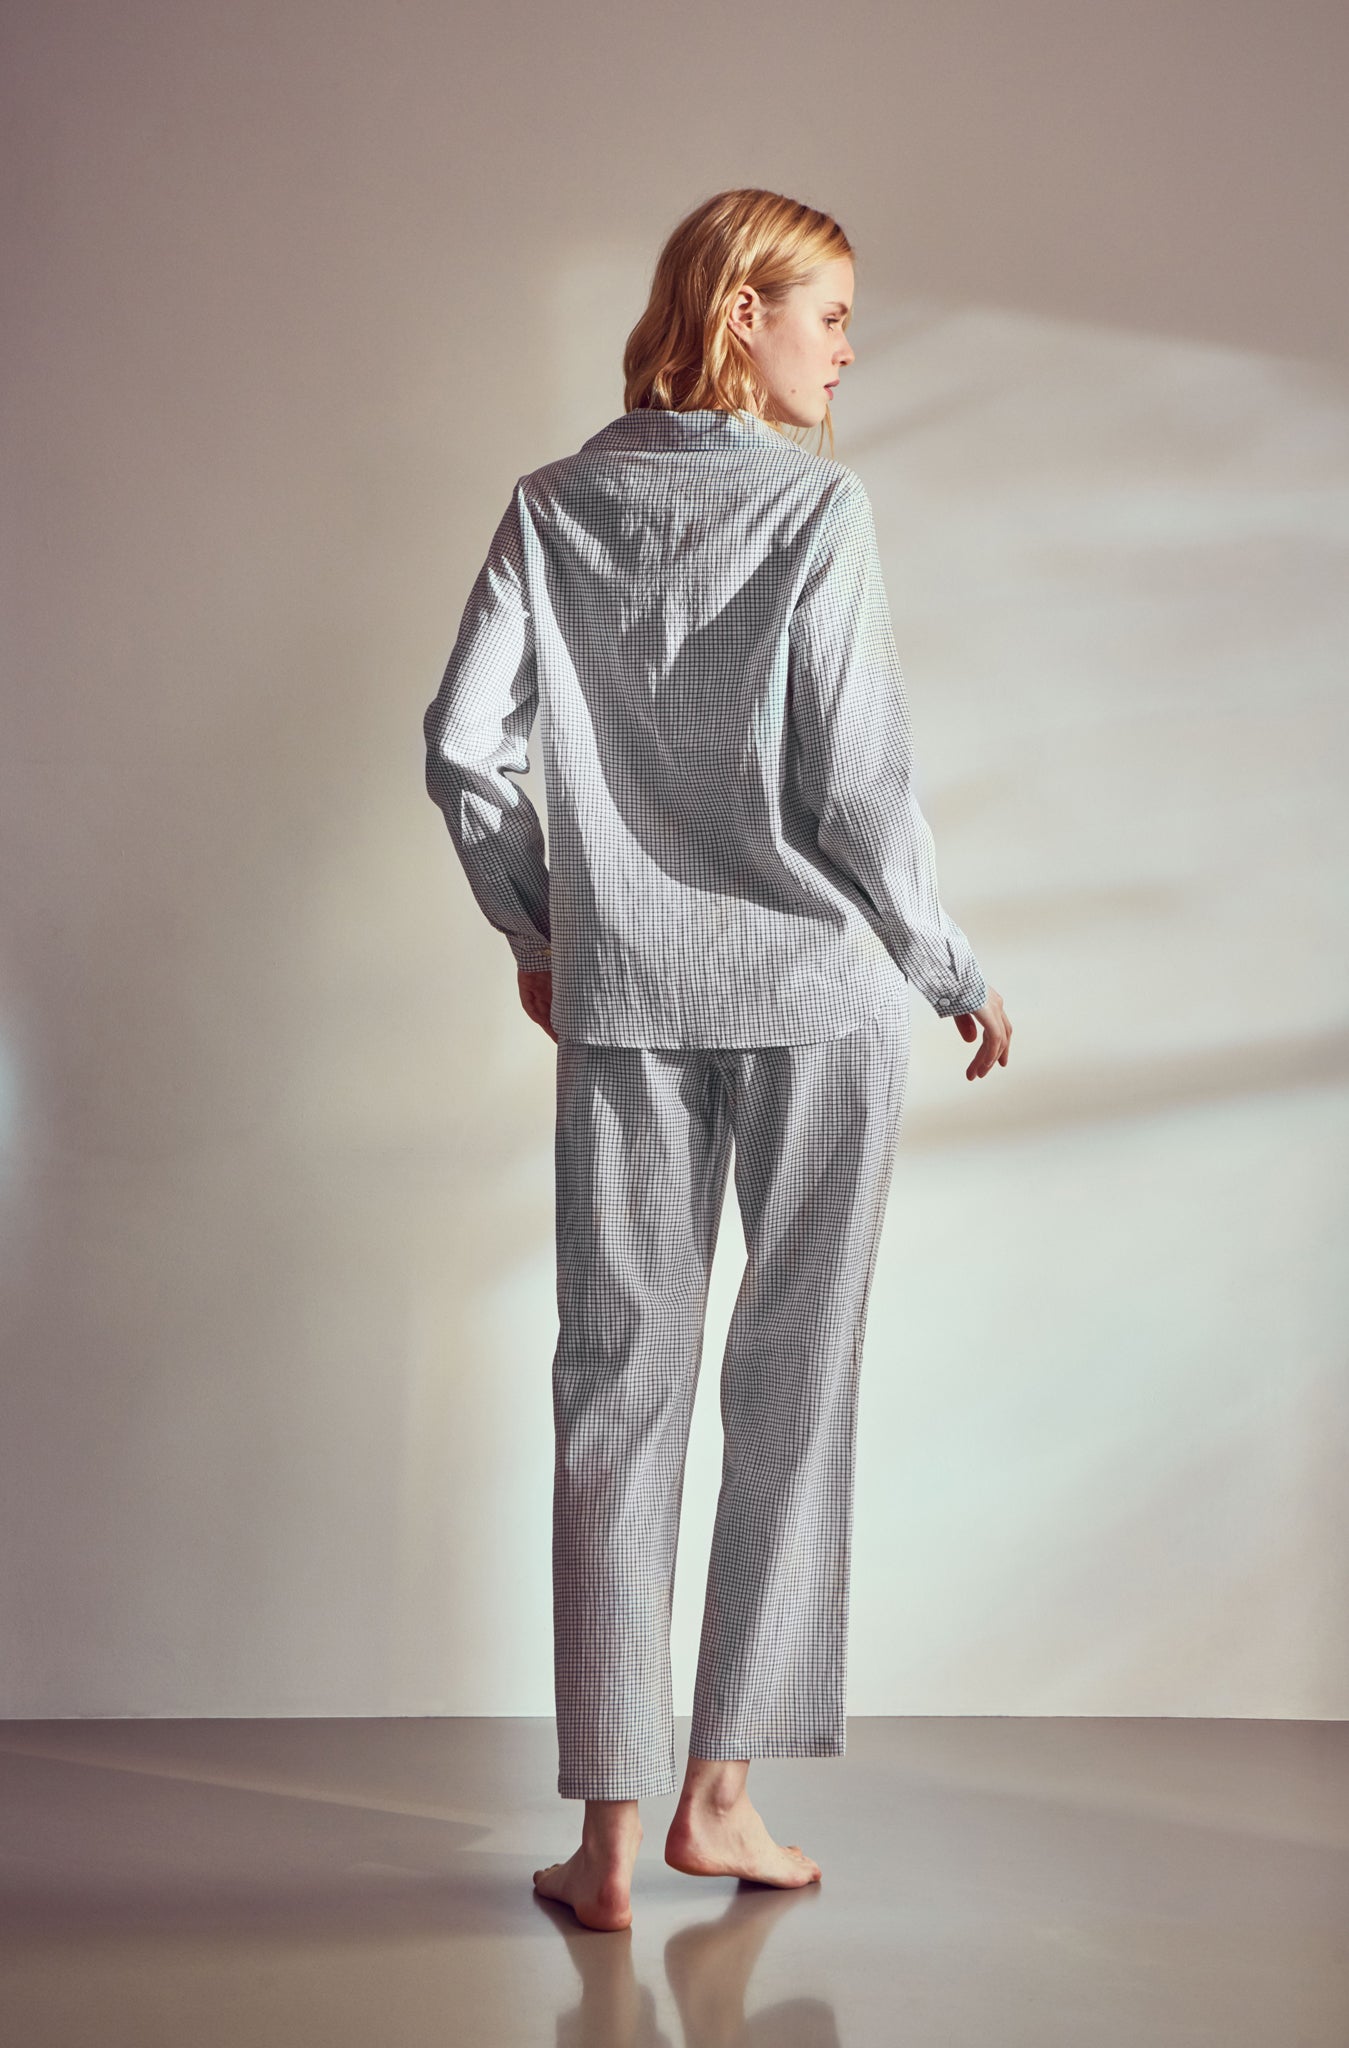 Sustainable, hand woven cotton pyjamas. Ethical, luxury nightwear which is essential for today's conscious consumer. We support women weavers in India by buying their handloom cotton and supporting traditional craftsmanship. 